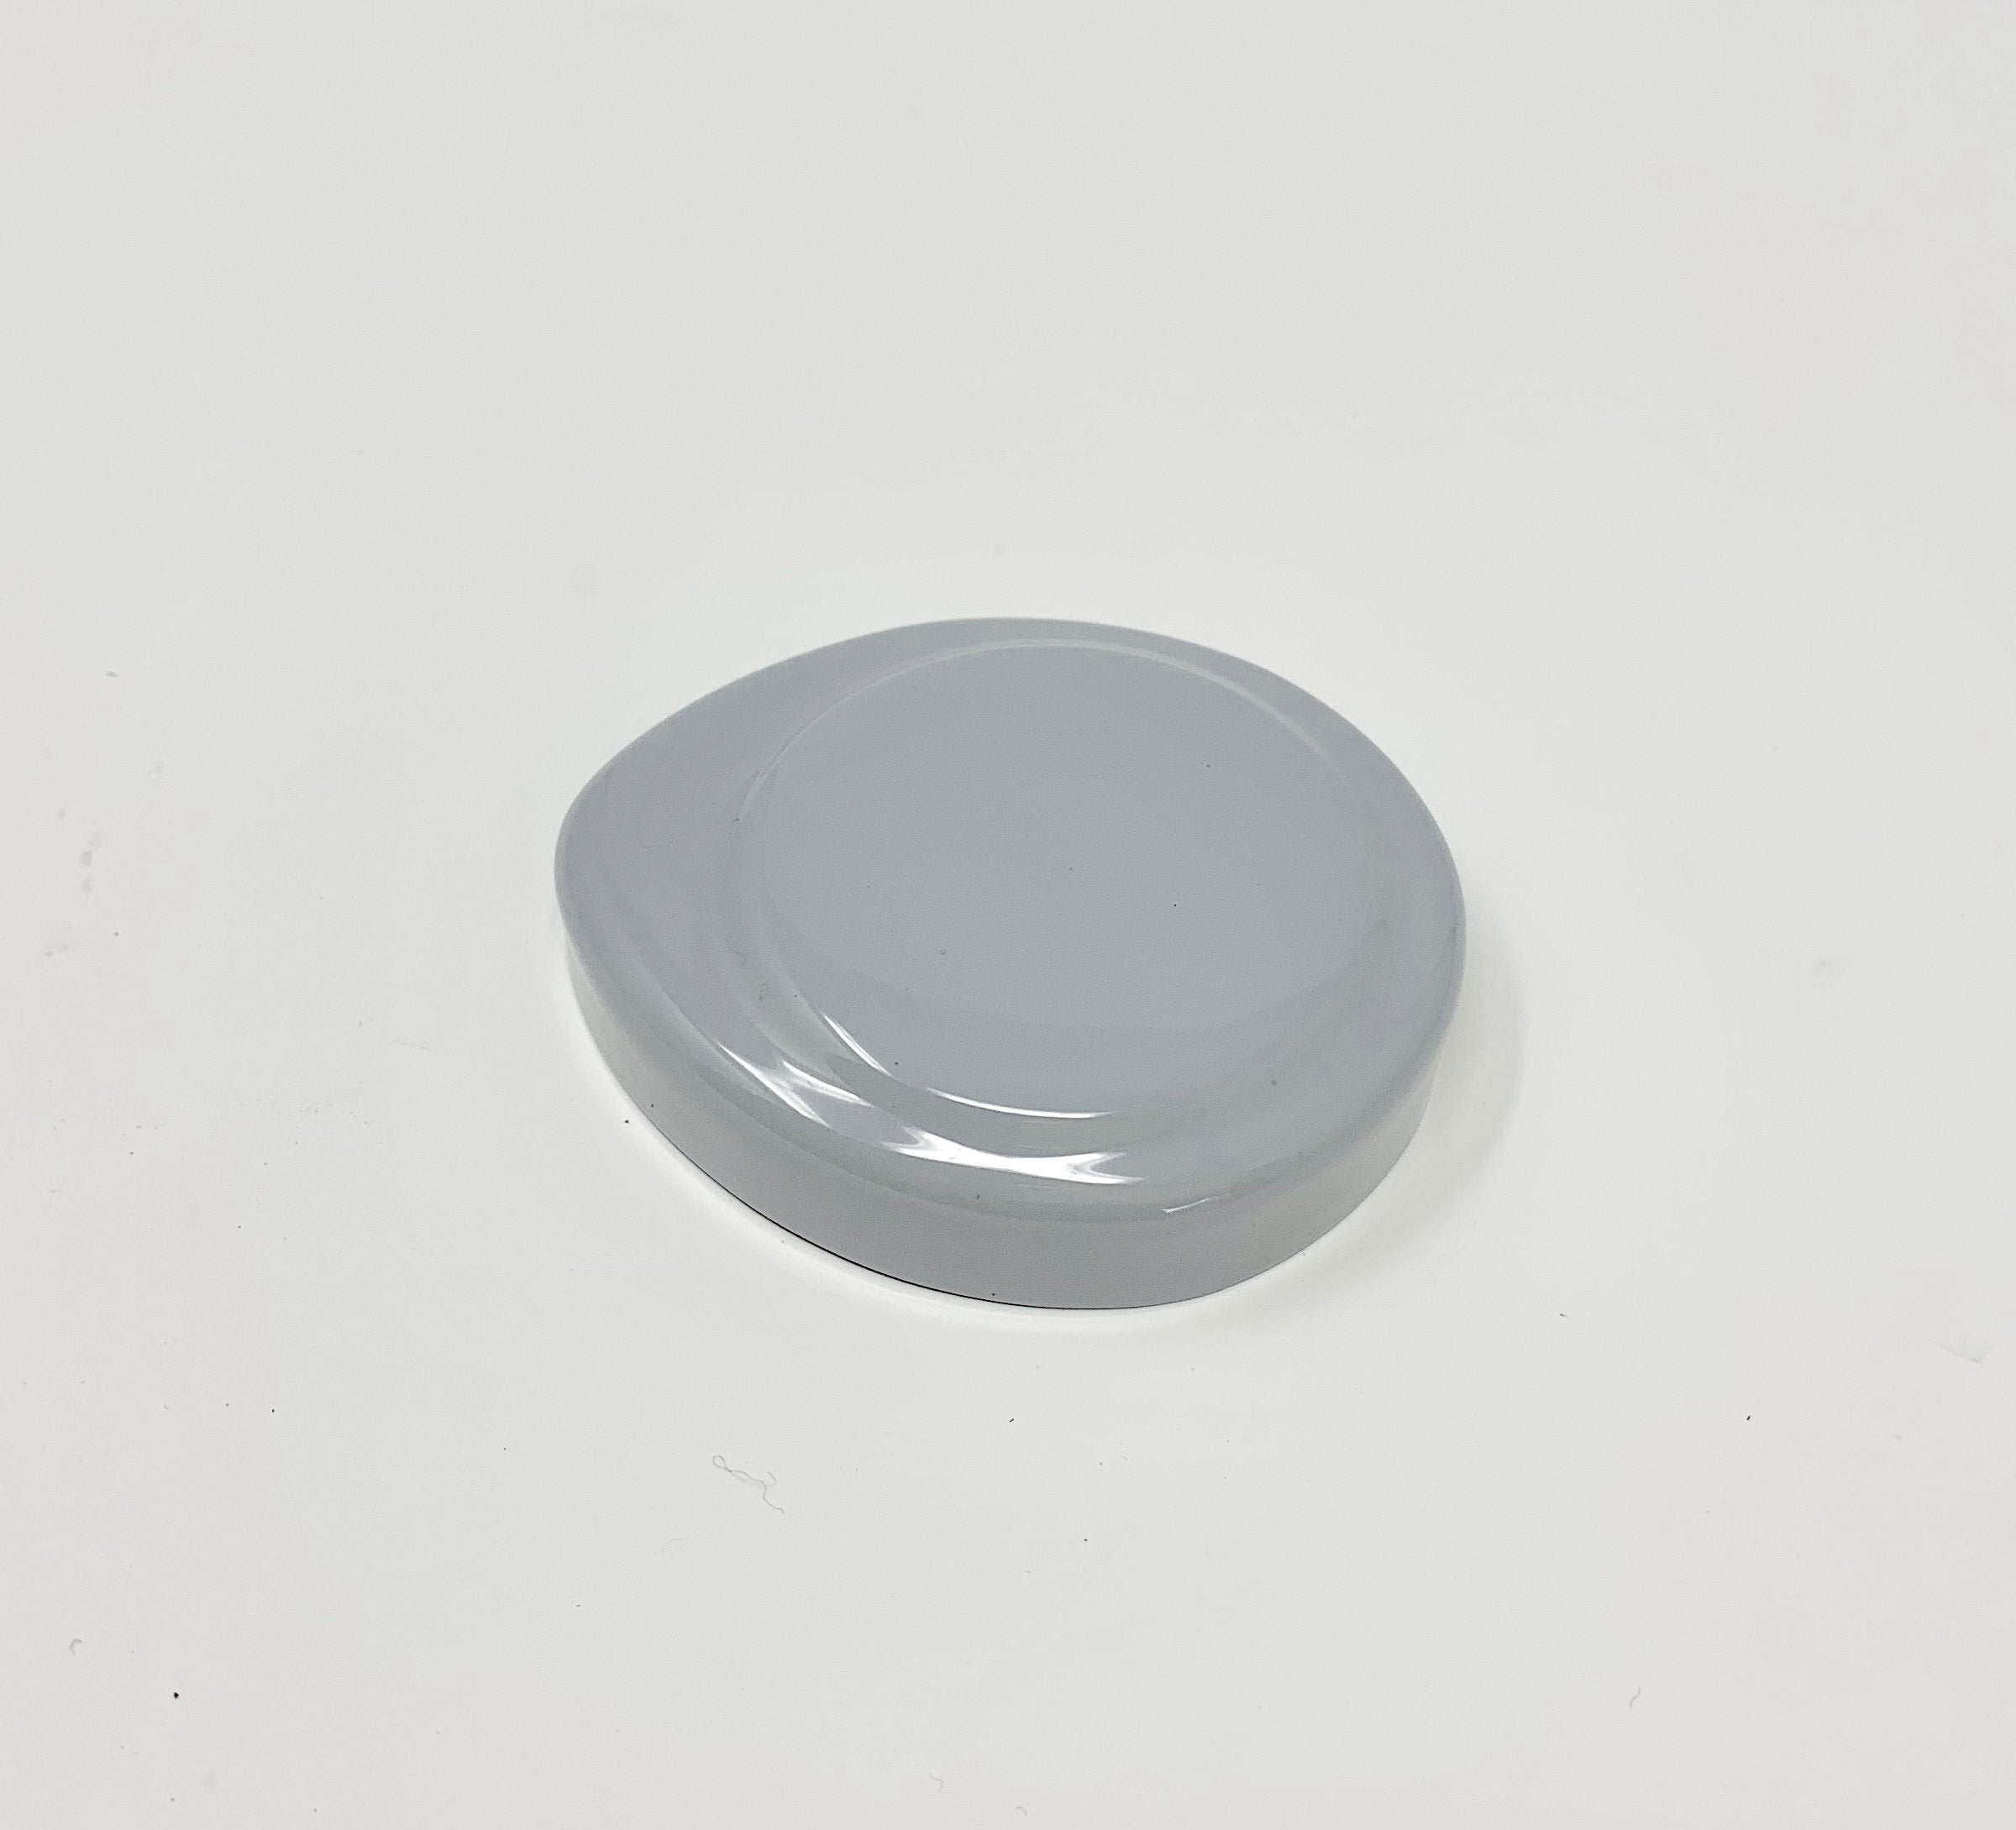 Proform Screen Washer Bottle Cap Cover - Mk7/7.5 Ford Fiesta (Painted Finishes)